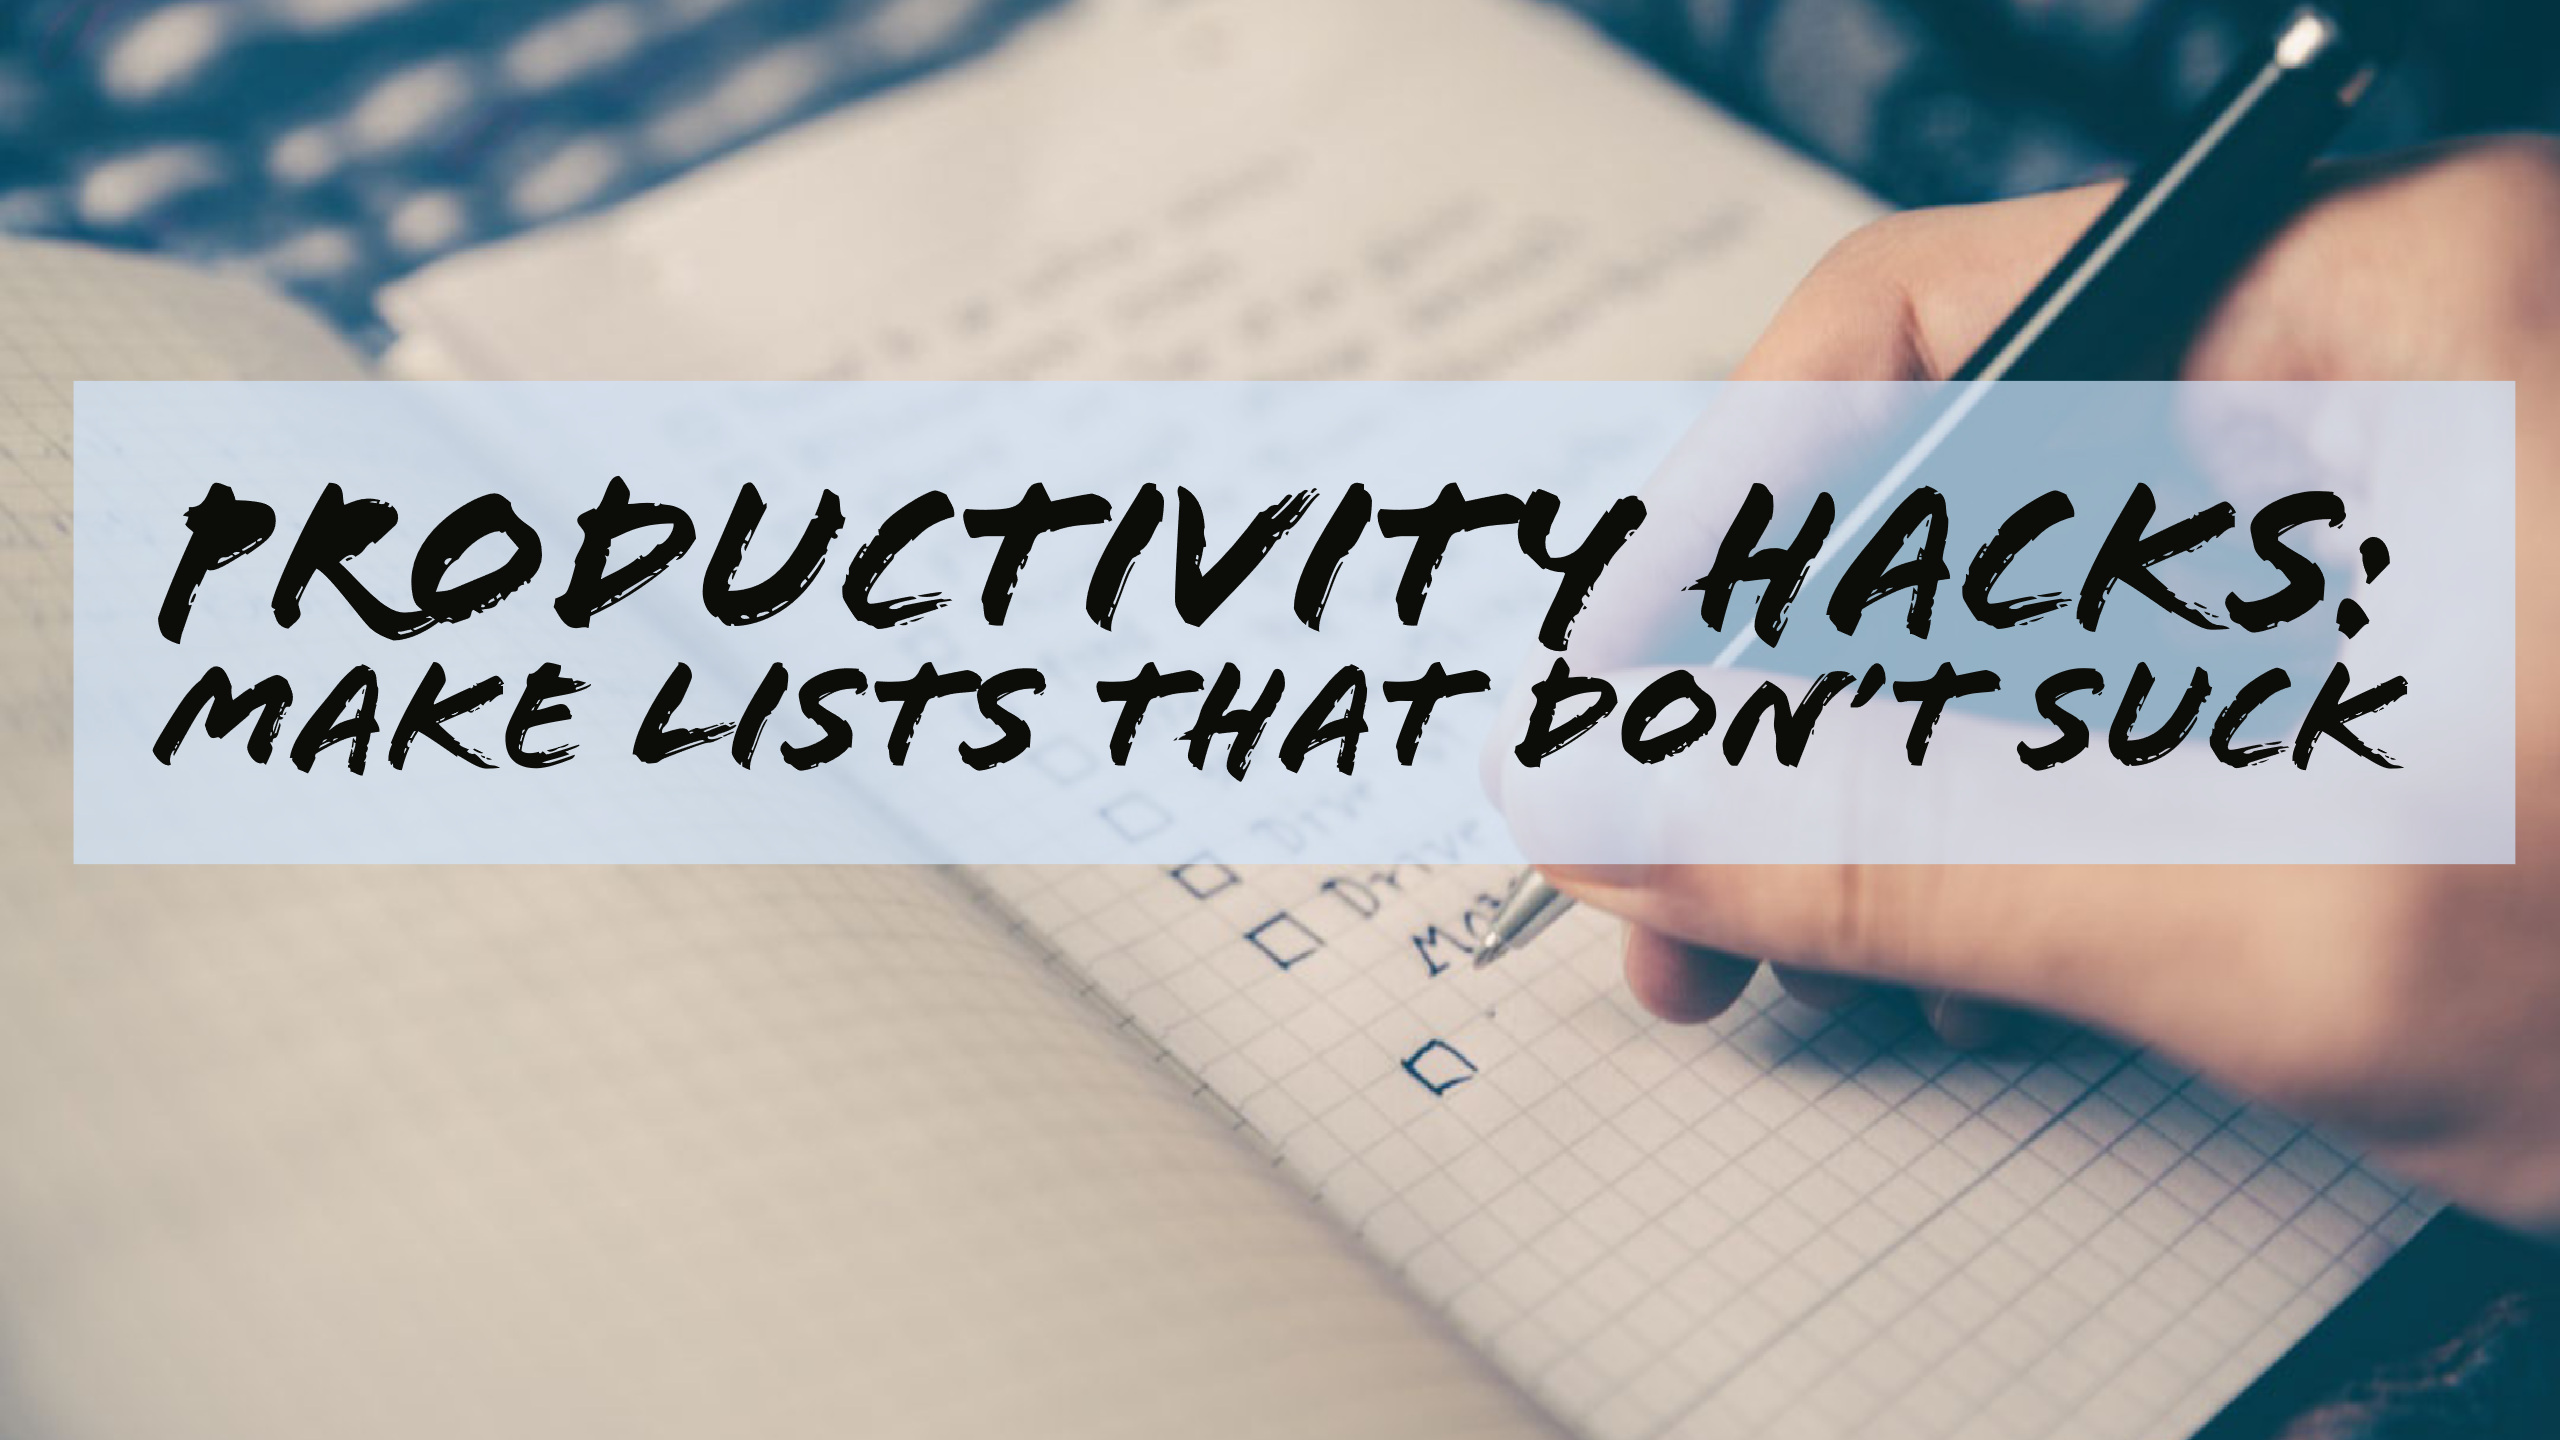 Productivity Hacks To-Do Lists title image with background image of hand writing in a notebook